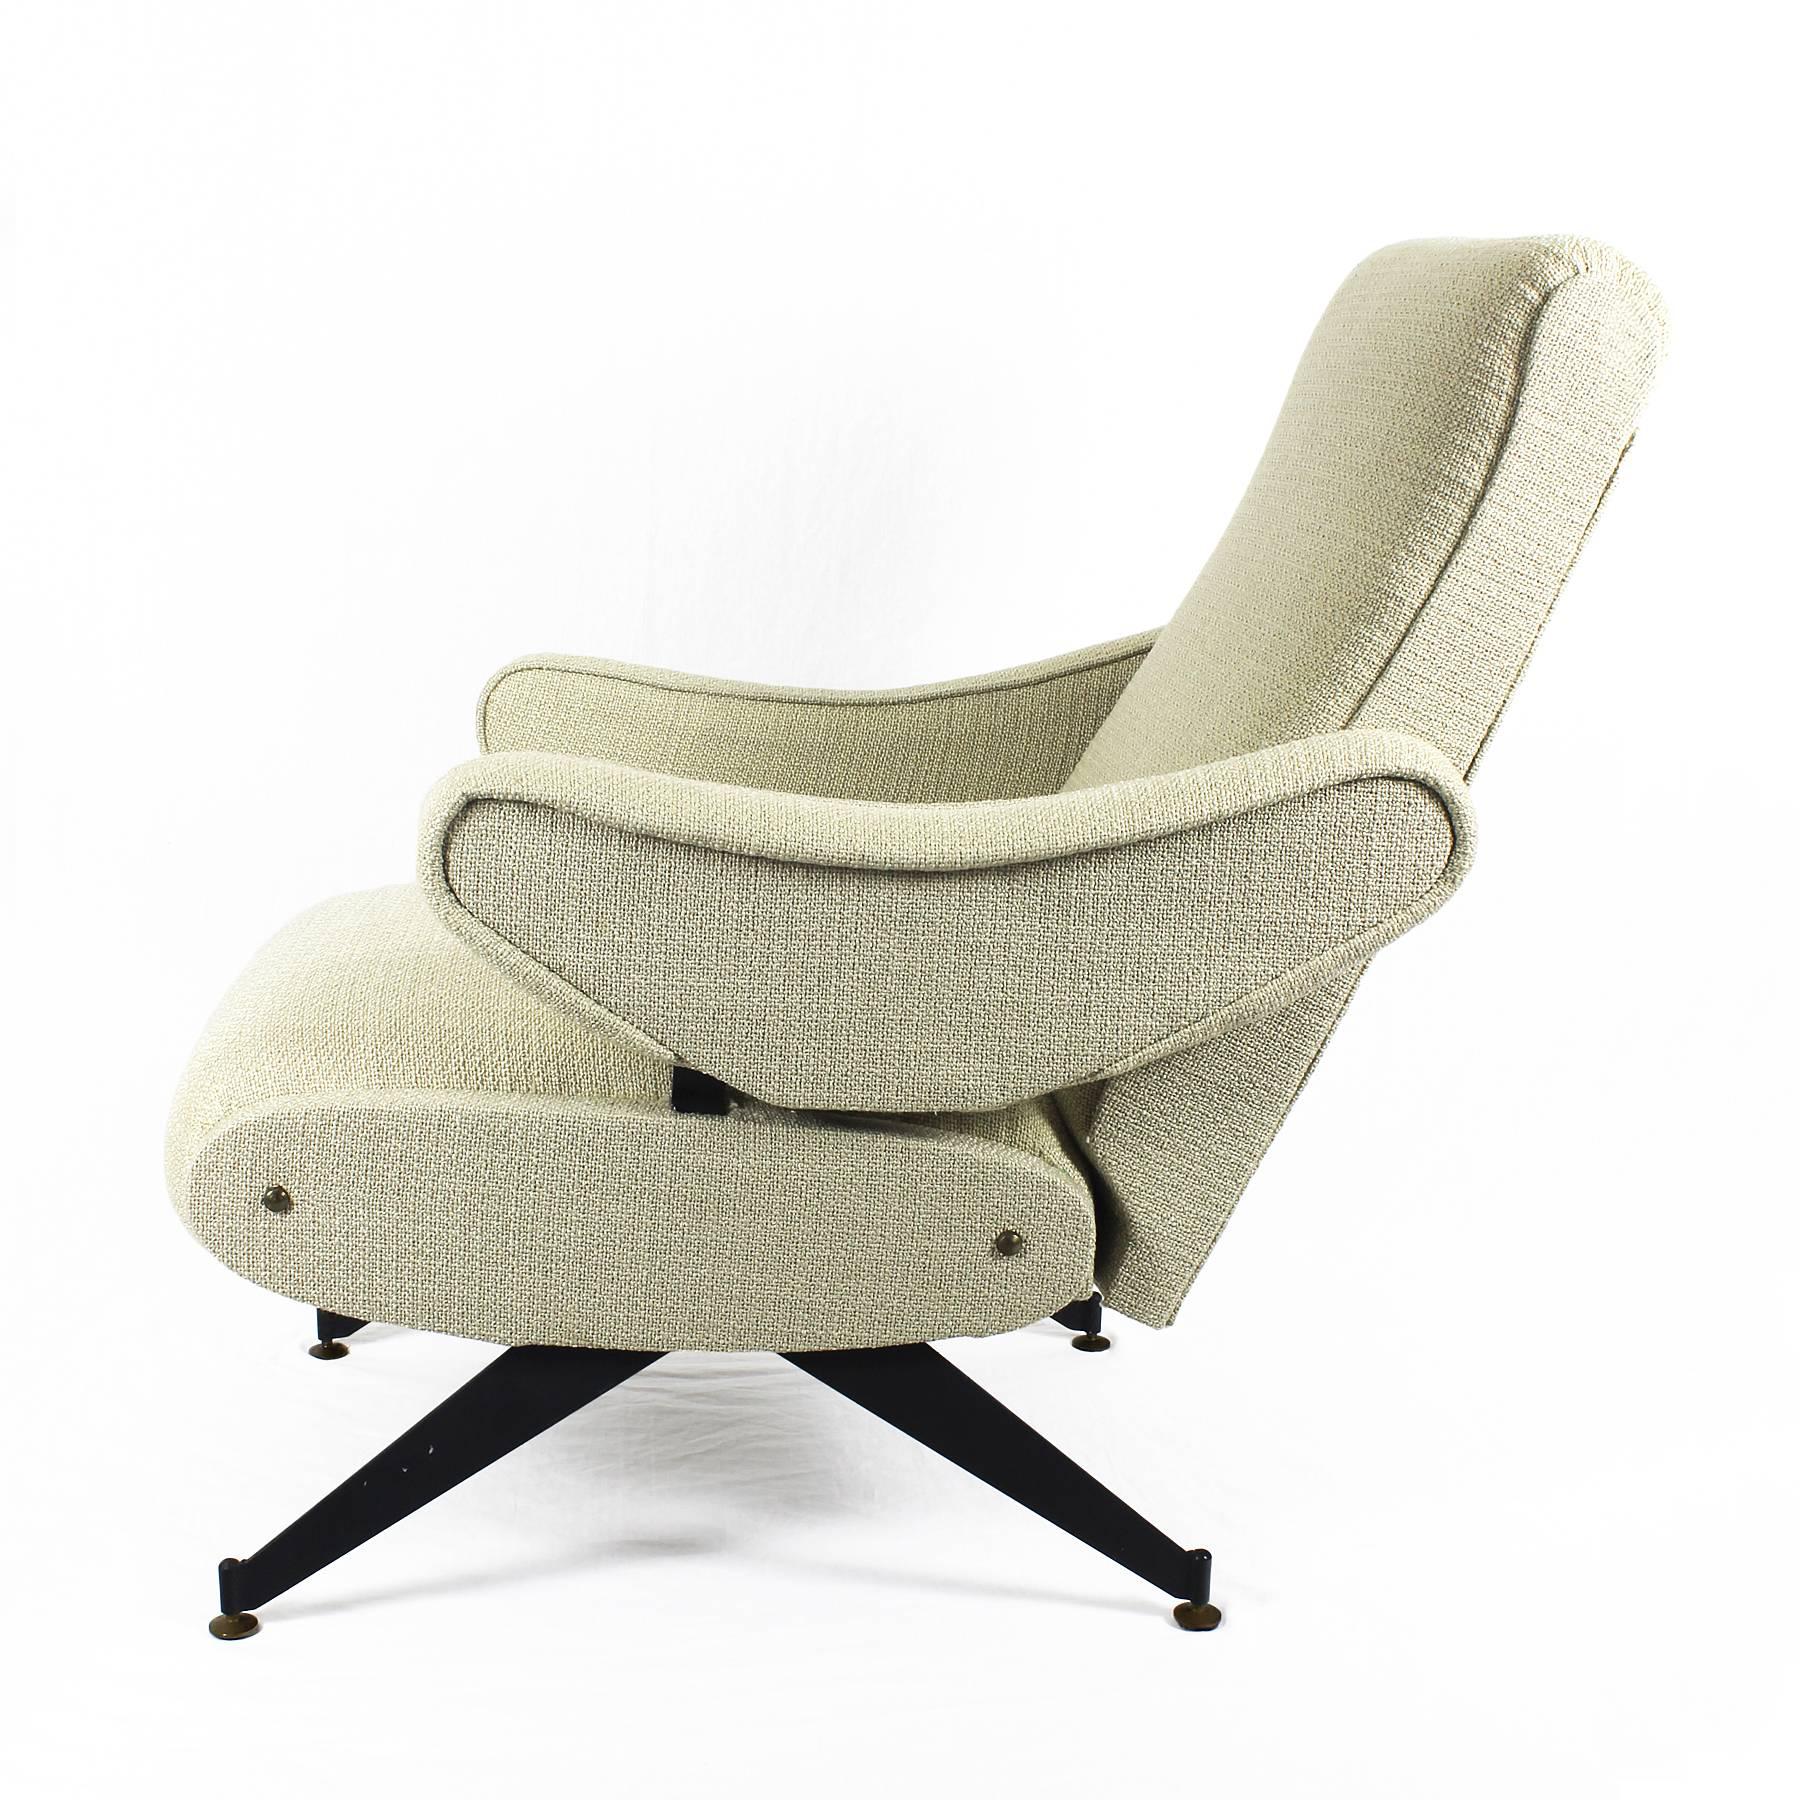 Mid-Century Modern Reclinable Armchair by Oscar Gigante, Beige Fabric - Italy In Good Condition For Sale In Girona, ES